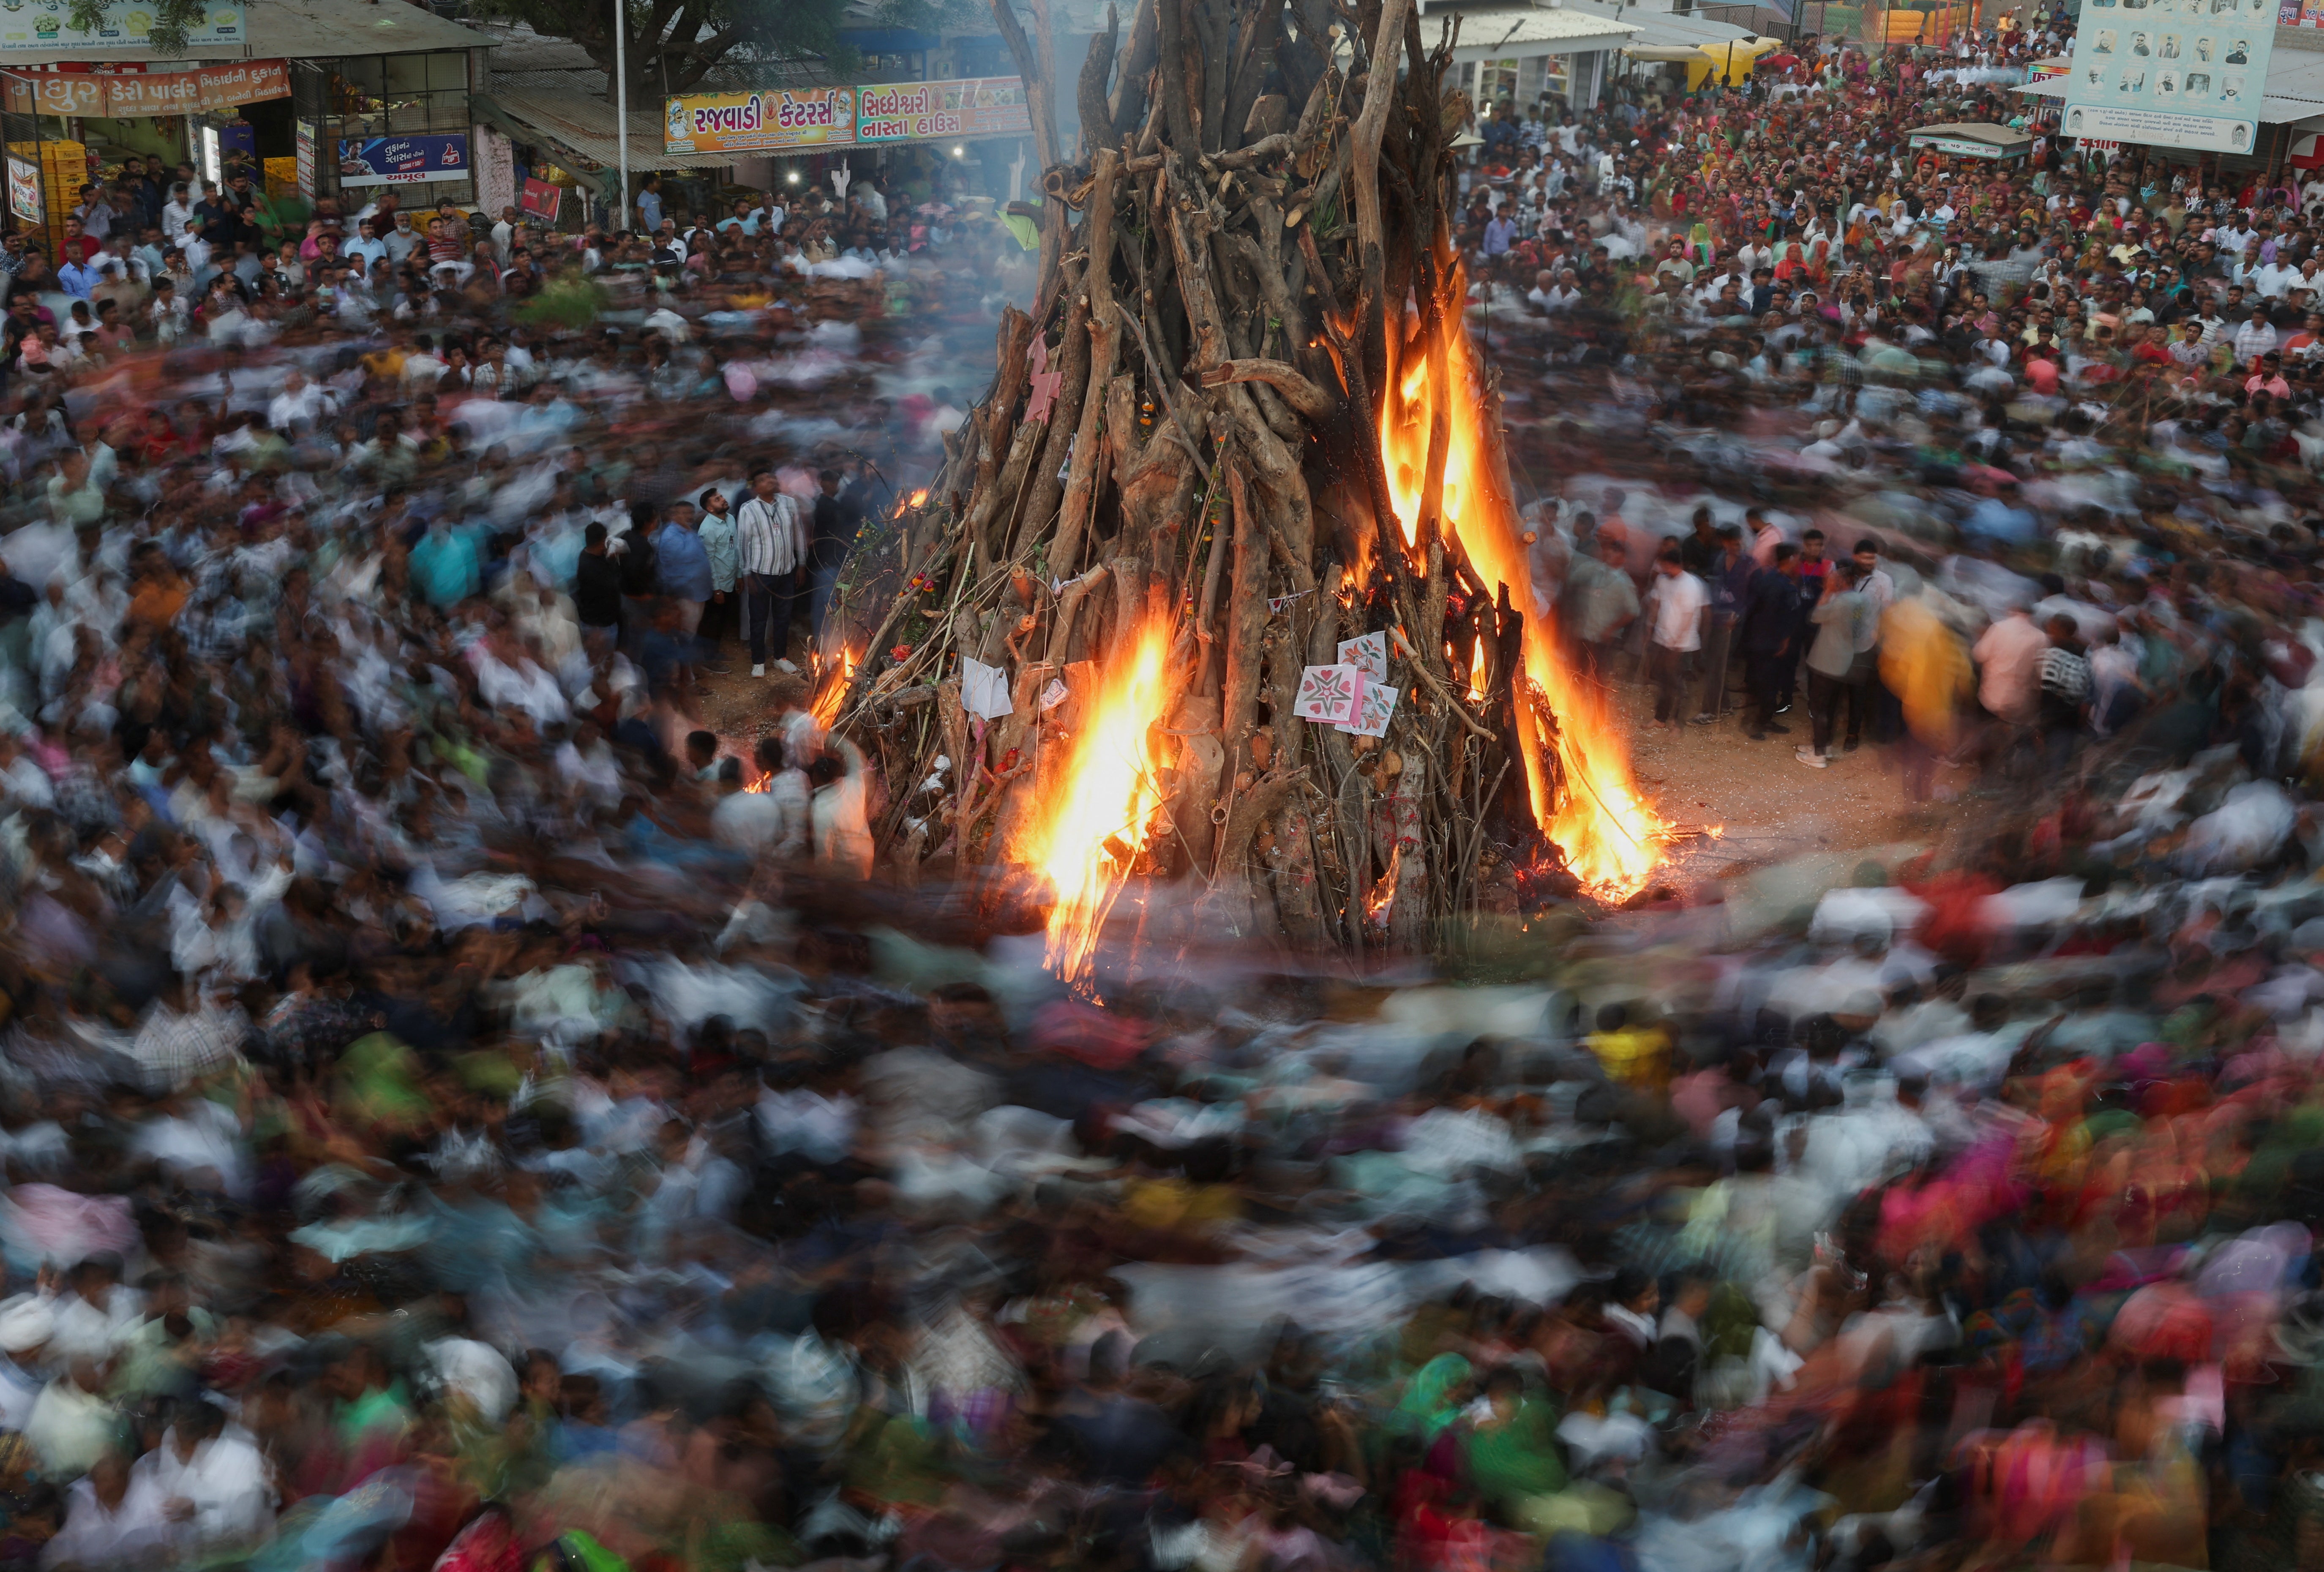 Hindu devotees walk around a bonfire during a ritual known as “Holika Dahan” which is part of the Holi festival celebrations on the outskirts of Ahmedabad